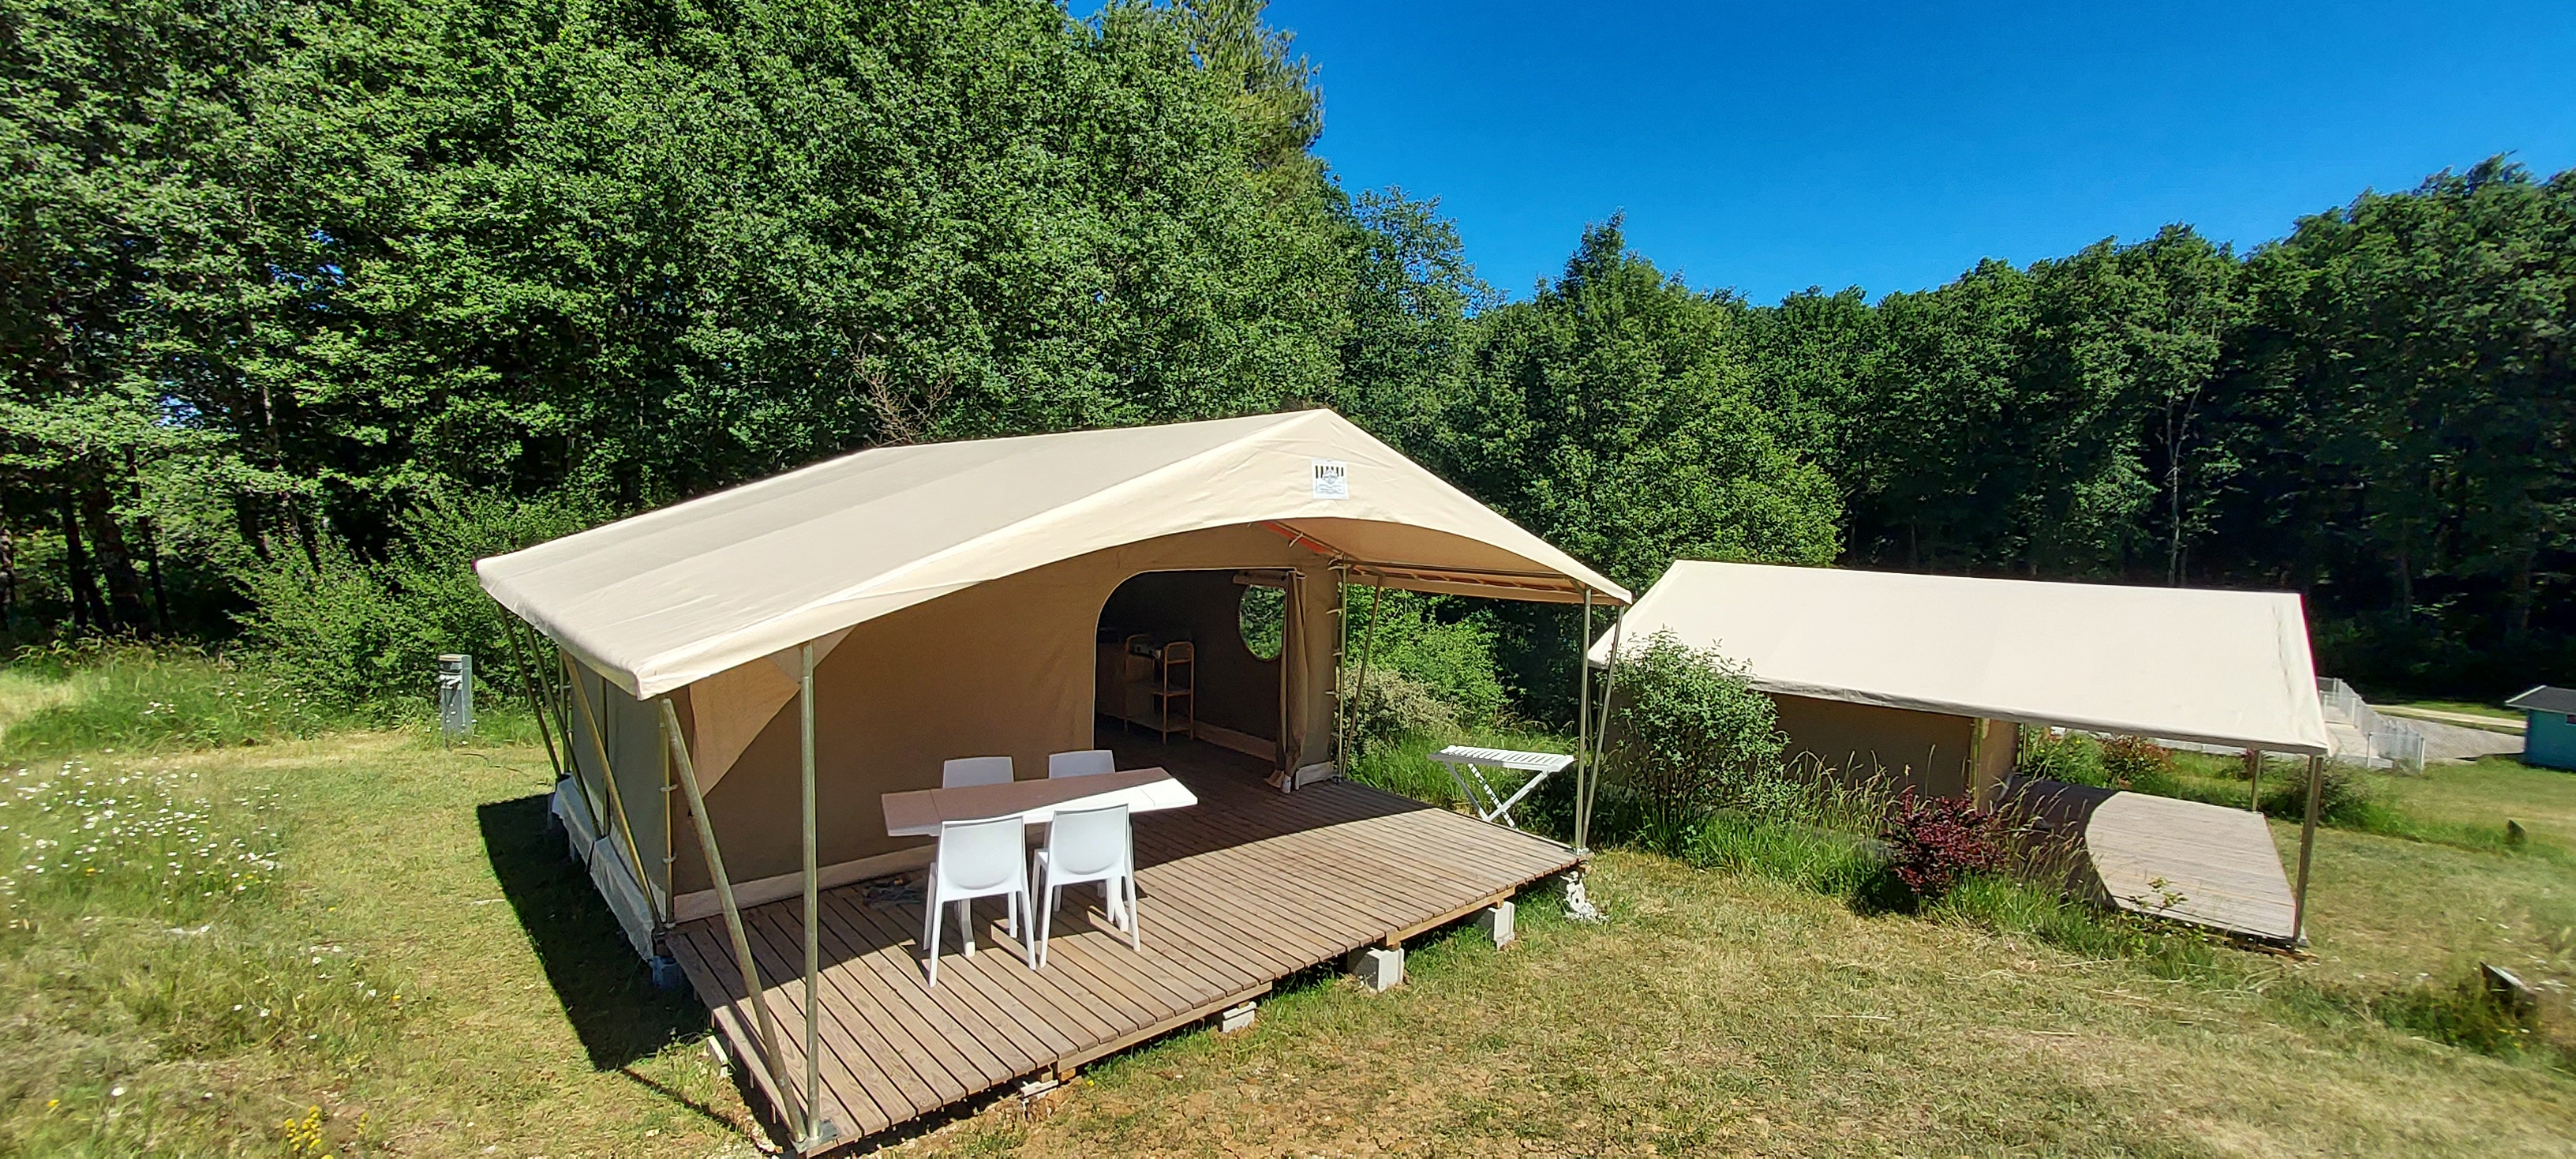 Glamping Lodge Tent